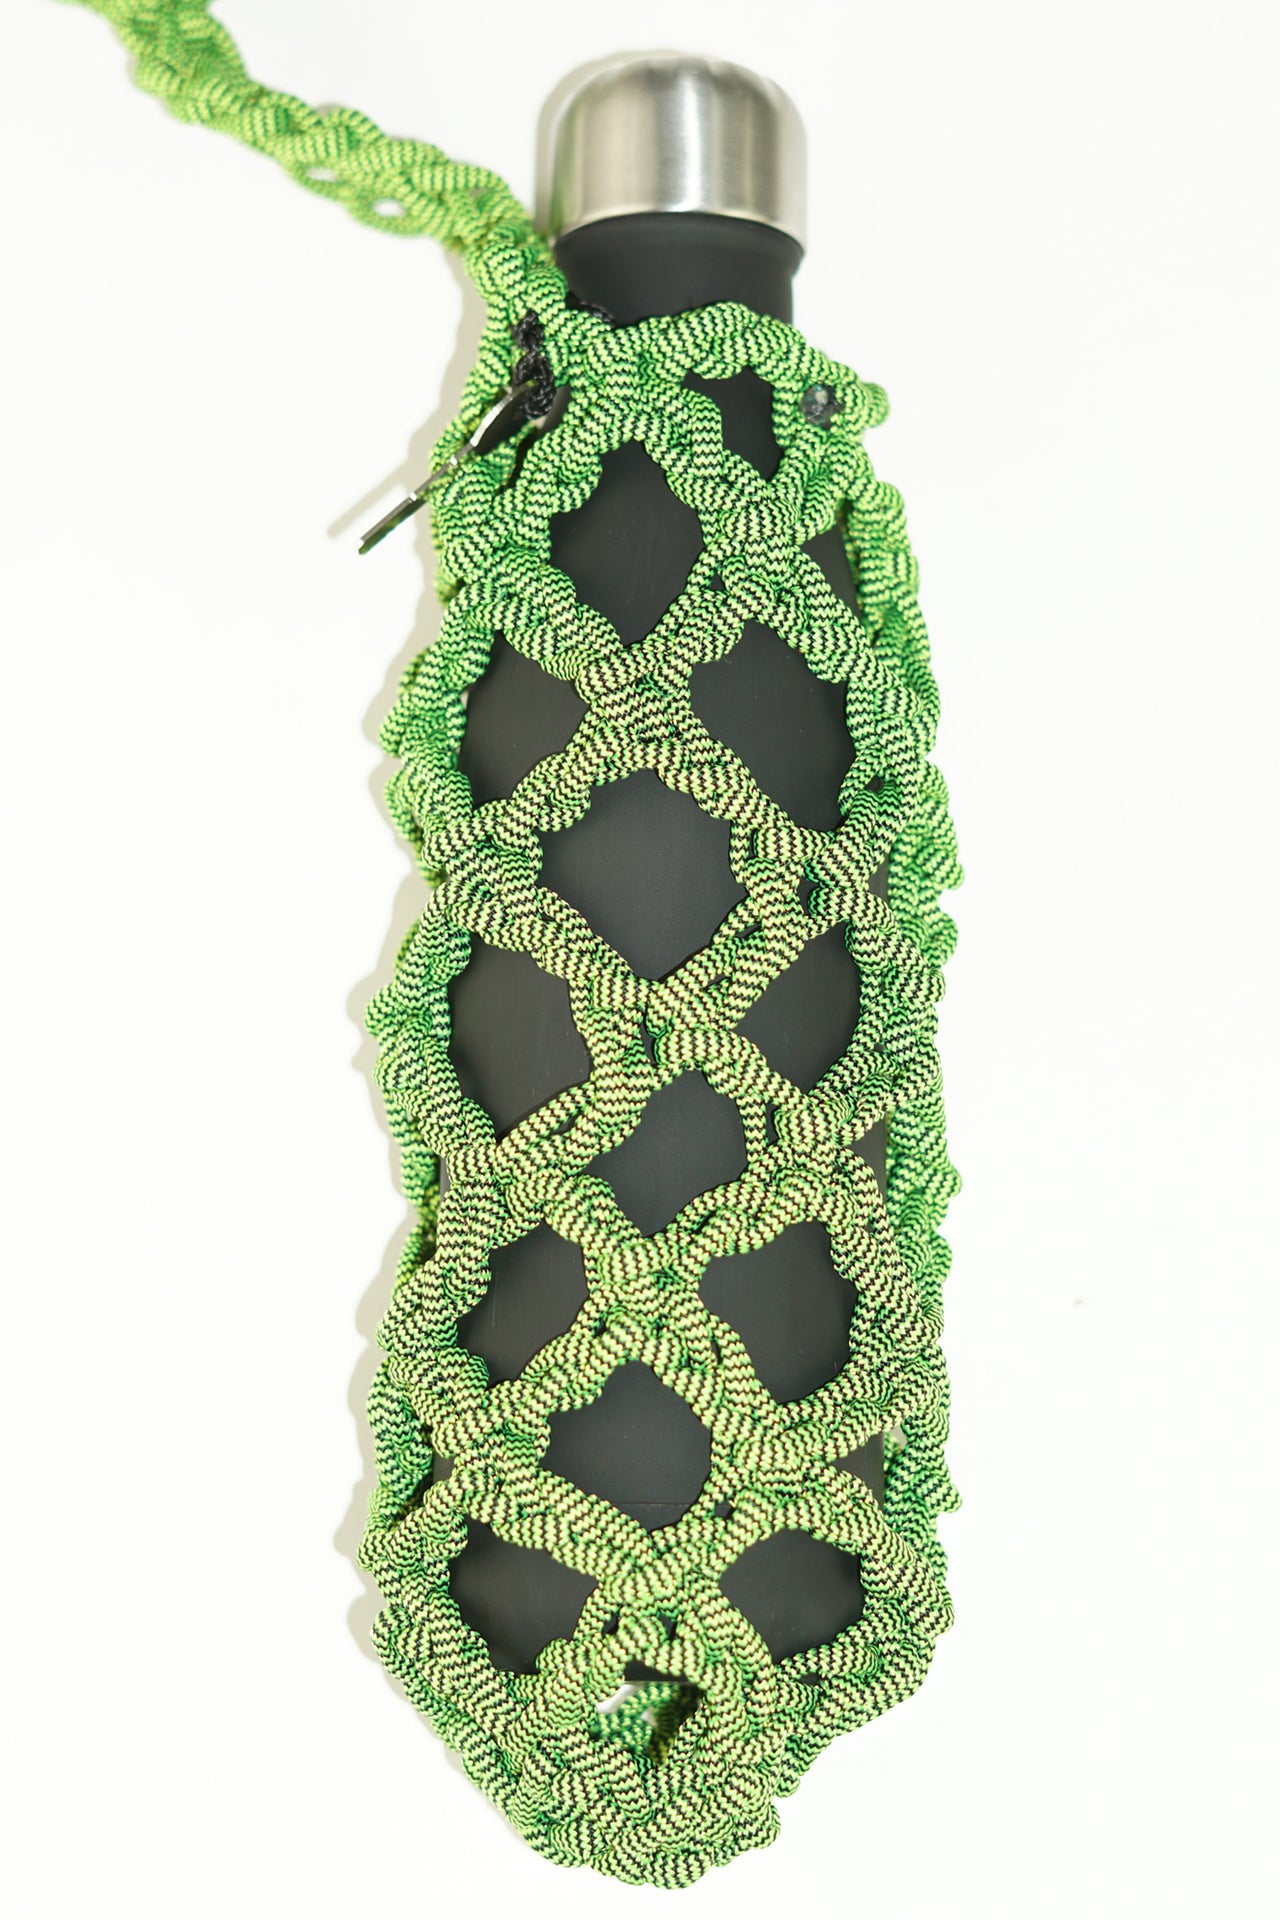 Green water porter made of paracord rope